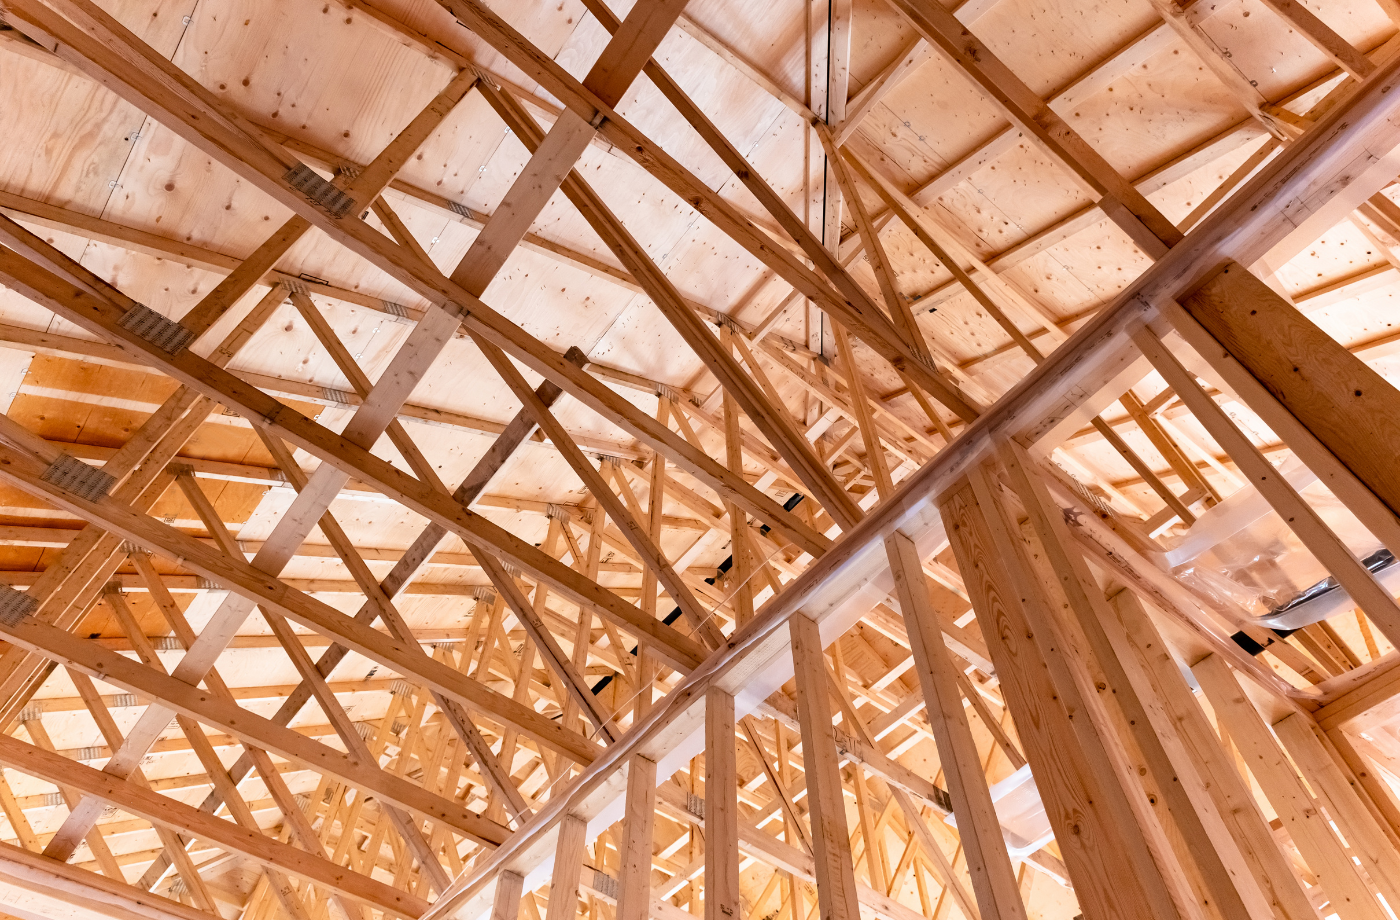 What’s next for the structural timber sector?